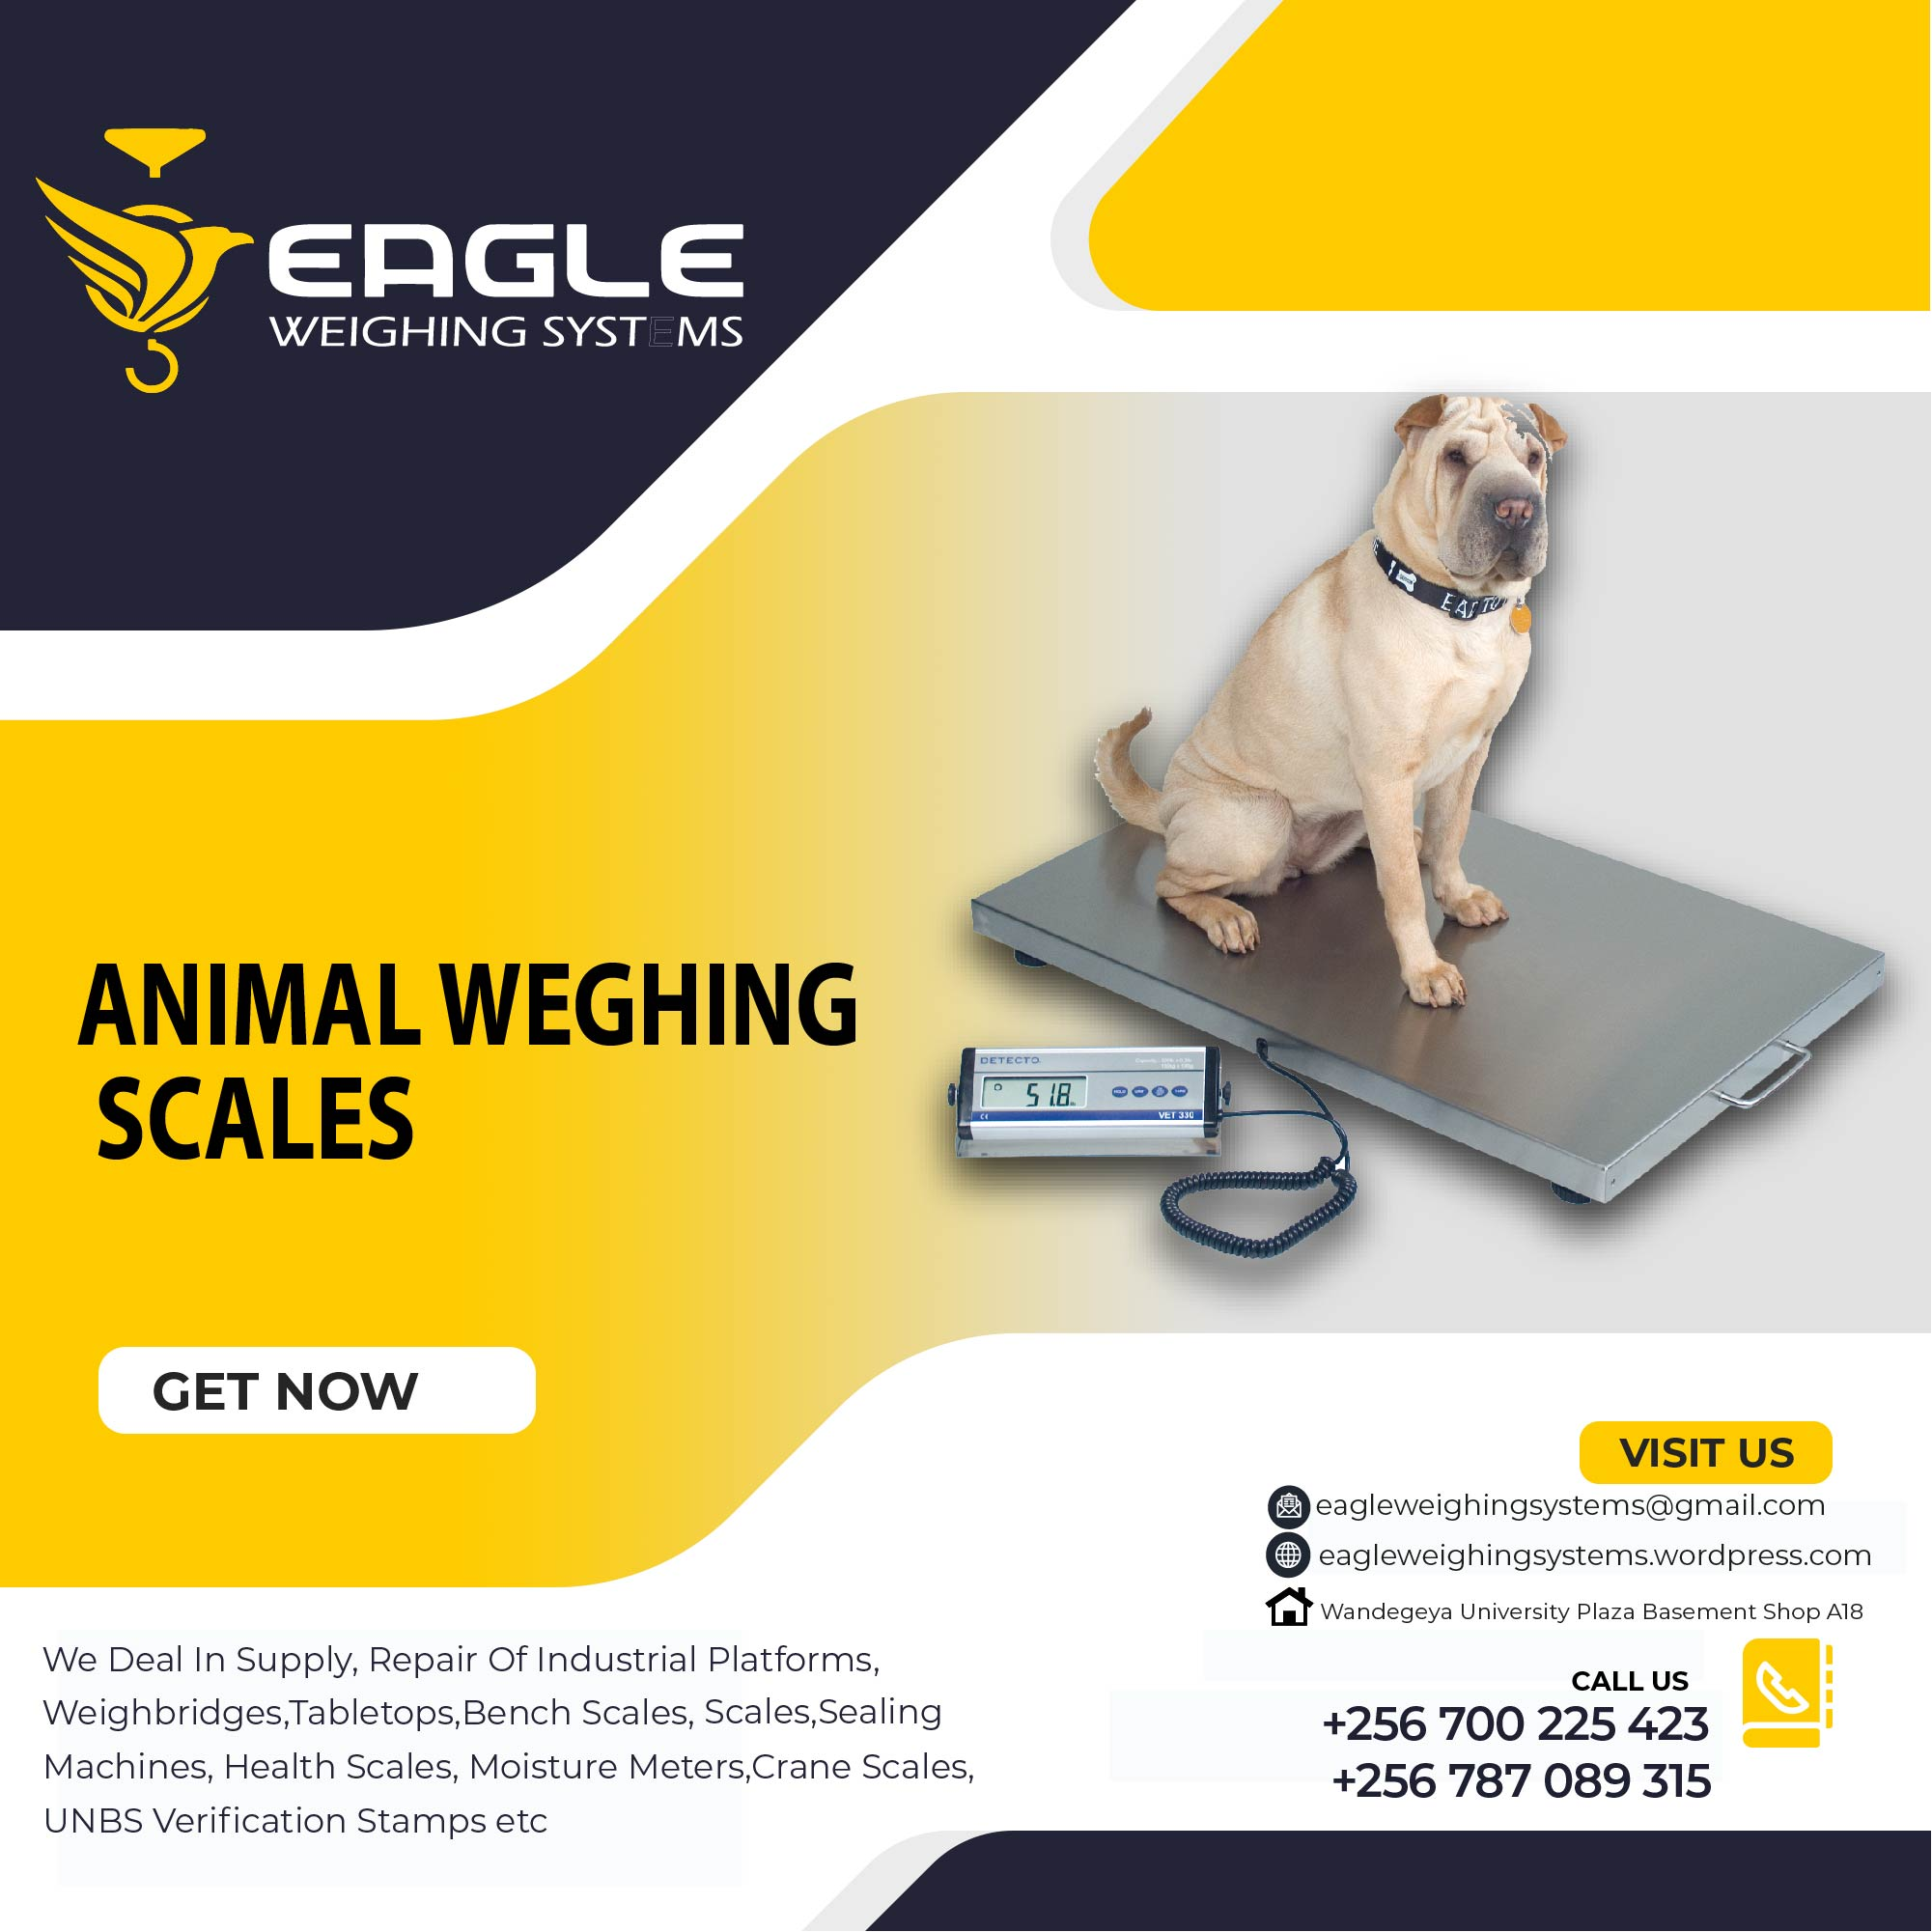 ANIMAL WEIGHING SCALES'